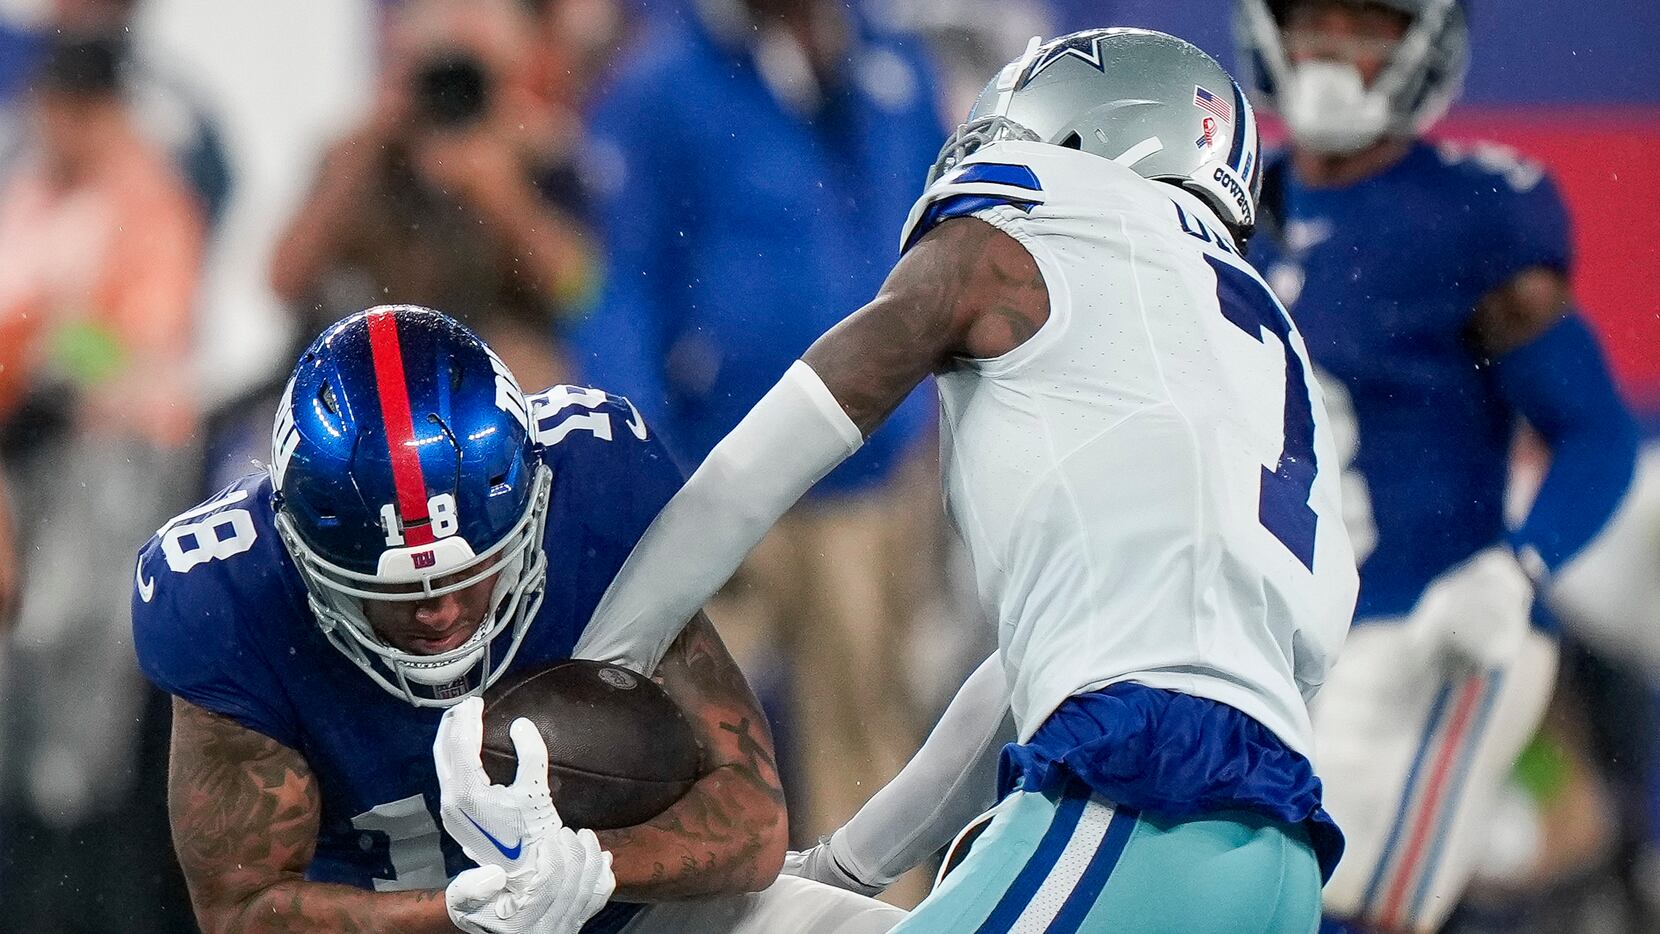 Big-hitting Trevon Diggs? That would bode well in Cowboys' quest for elite  defense